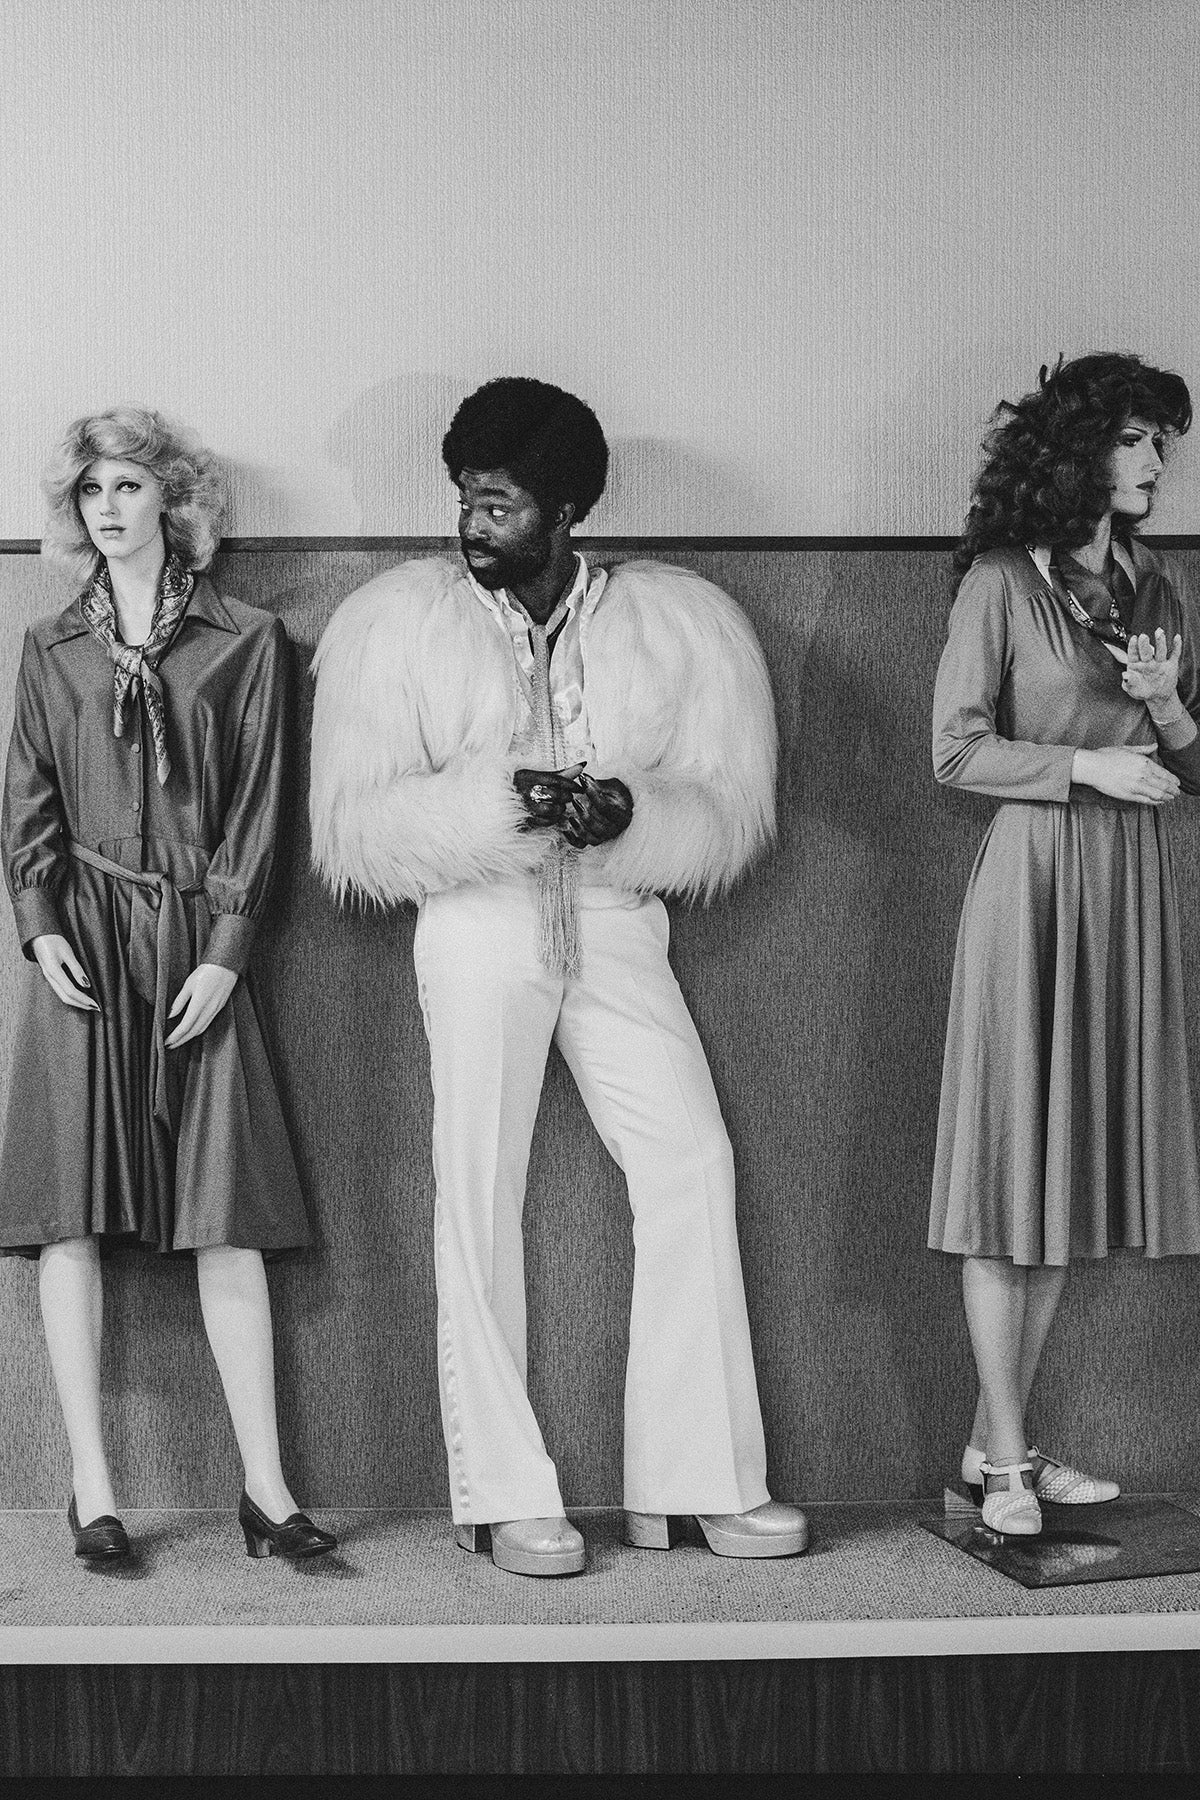 Black and white photograph by David Hurn showing Black Mirror stars Paapa Essiedu in a light feather jacket, slim pale trousers, and a skinny piece of fabric tied around his neck, standin between two mannequins wearing knee-length satin collared dresses